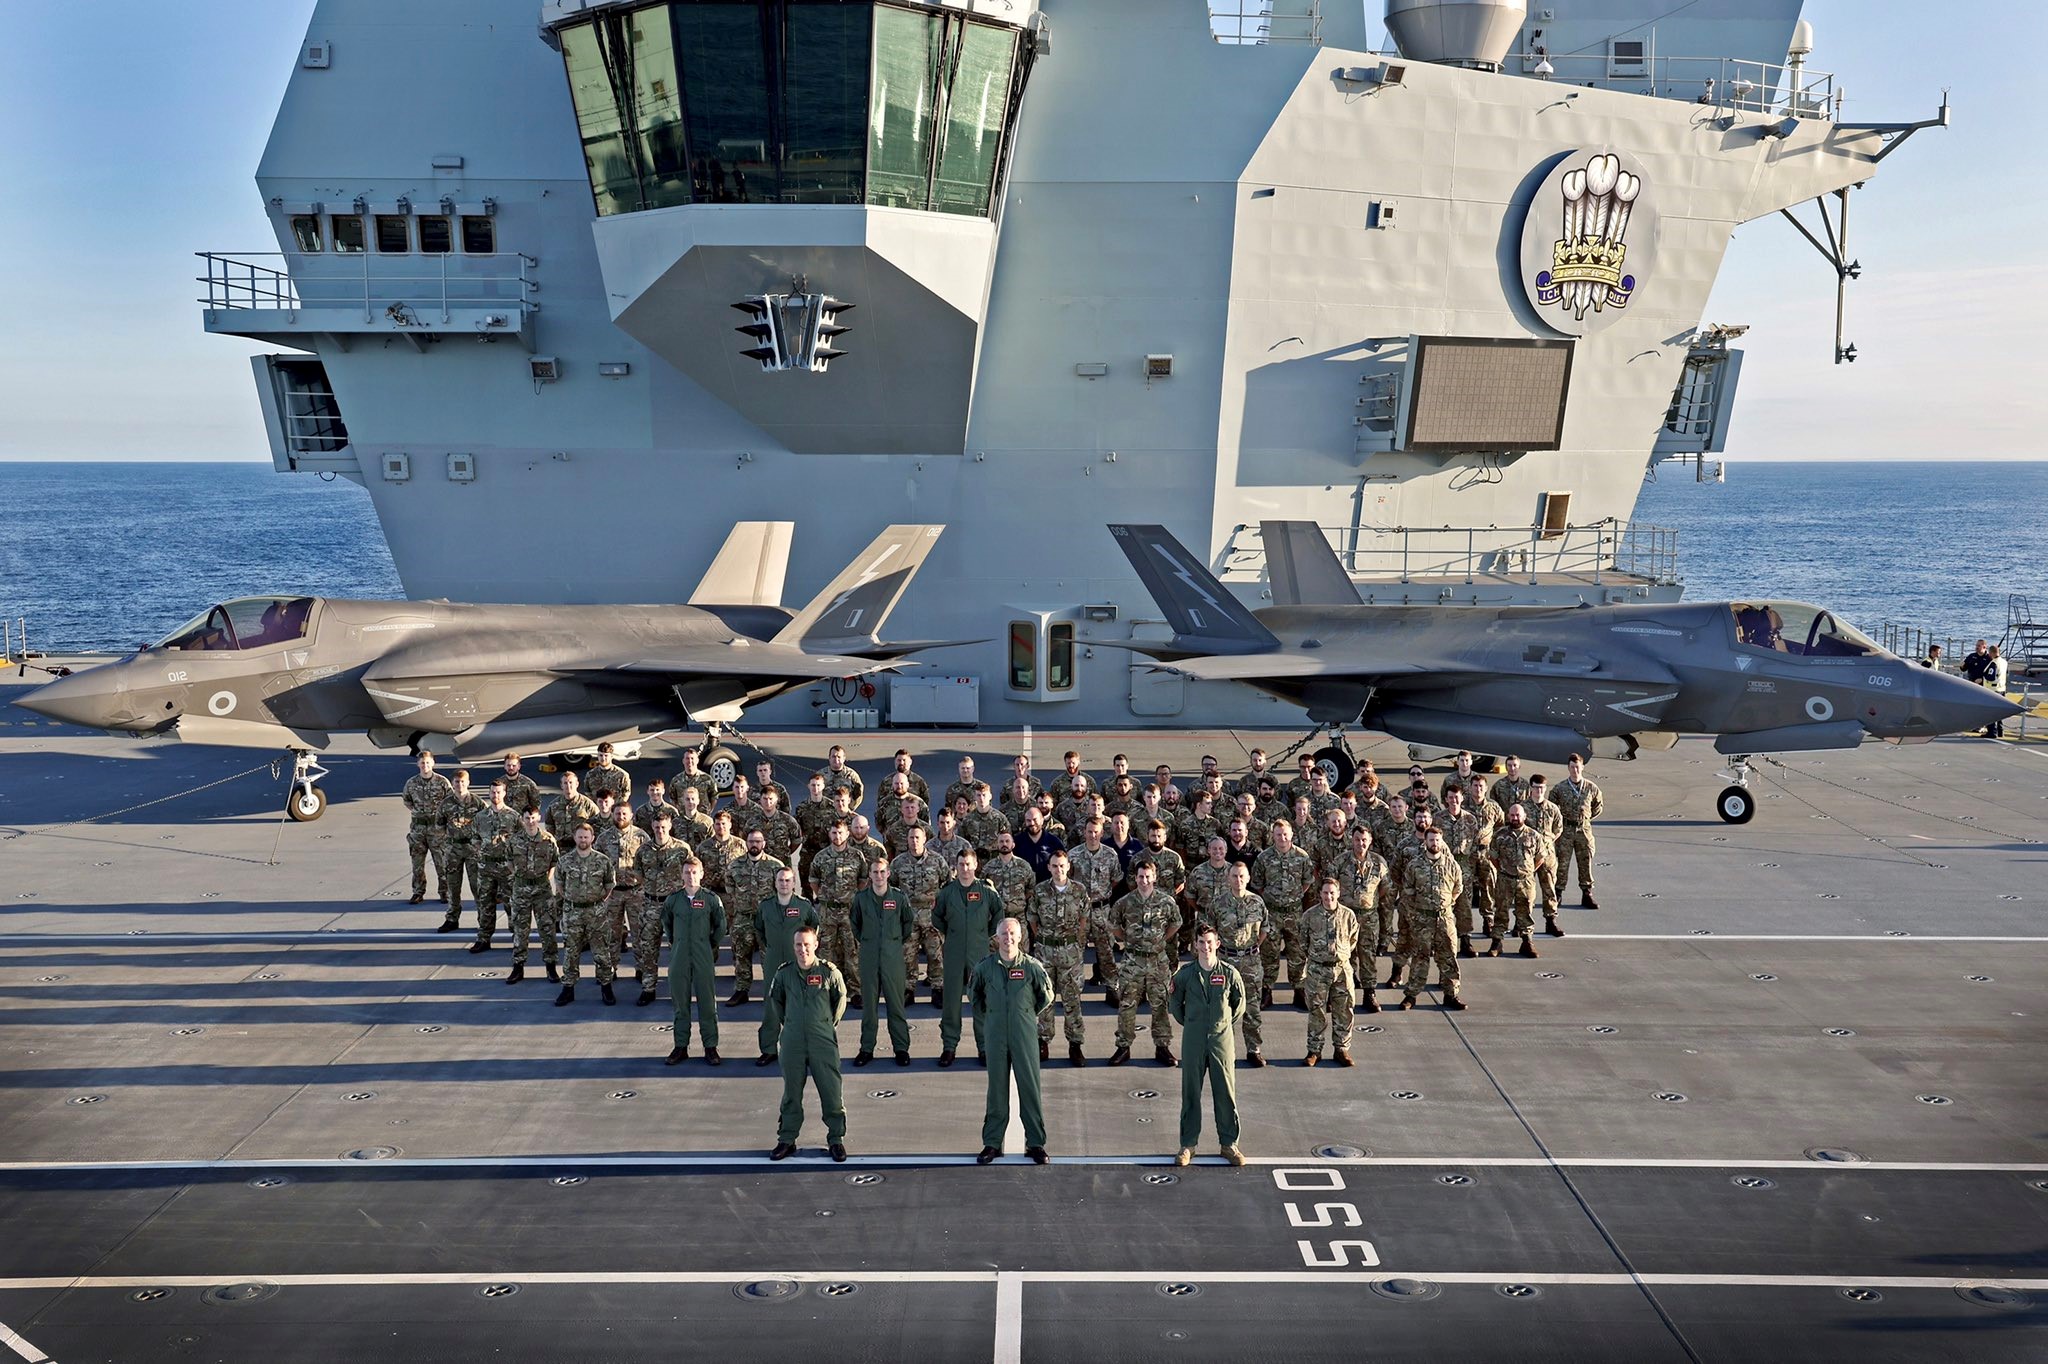 Personnel stand on flight deck of Aircraft carrier.